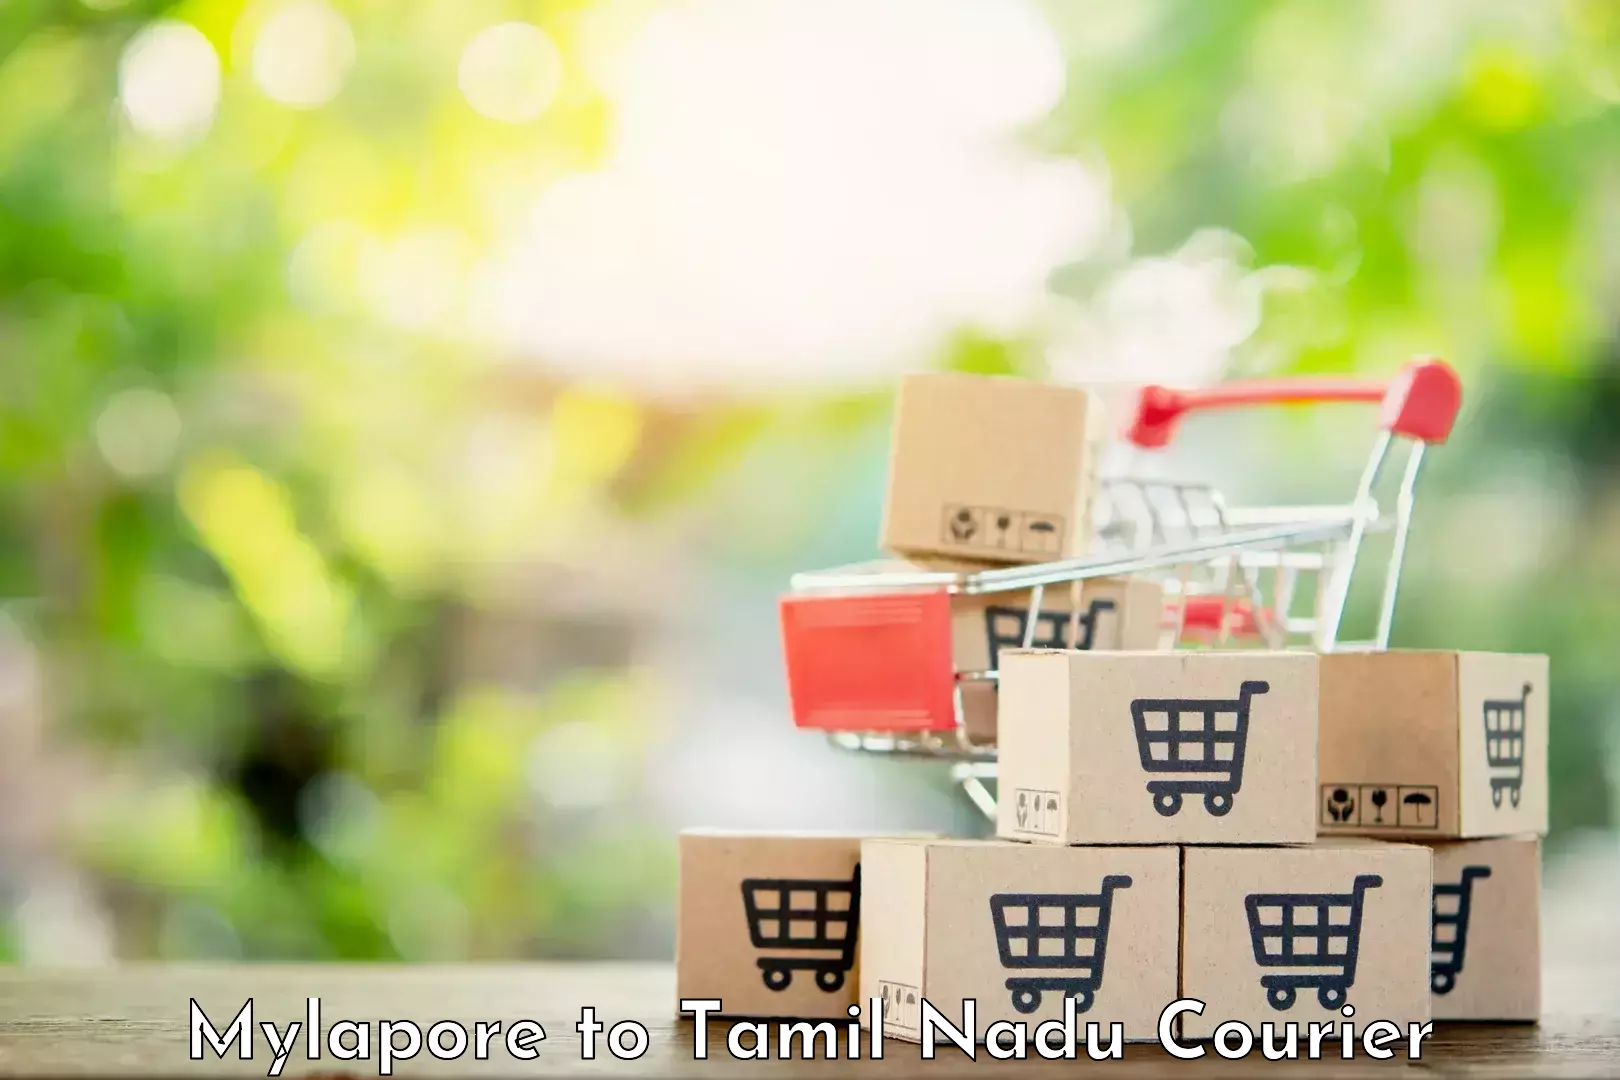 Online courier booking Mylapore to Kovilpatti